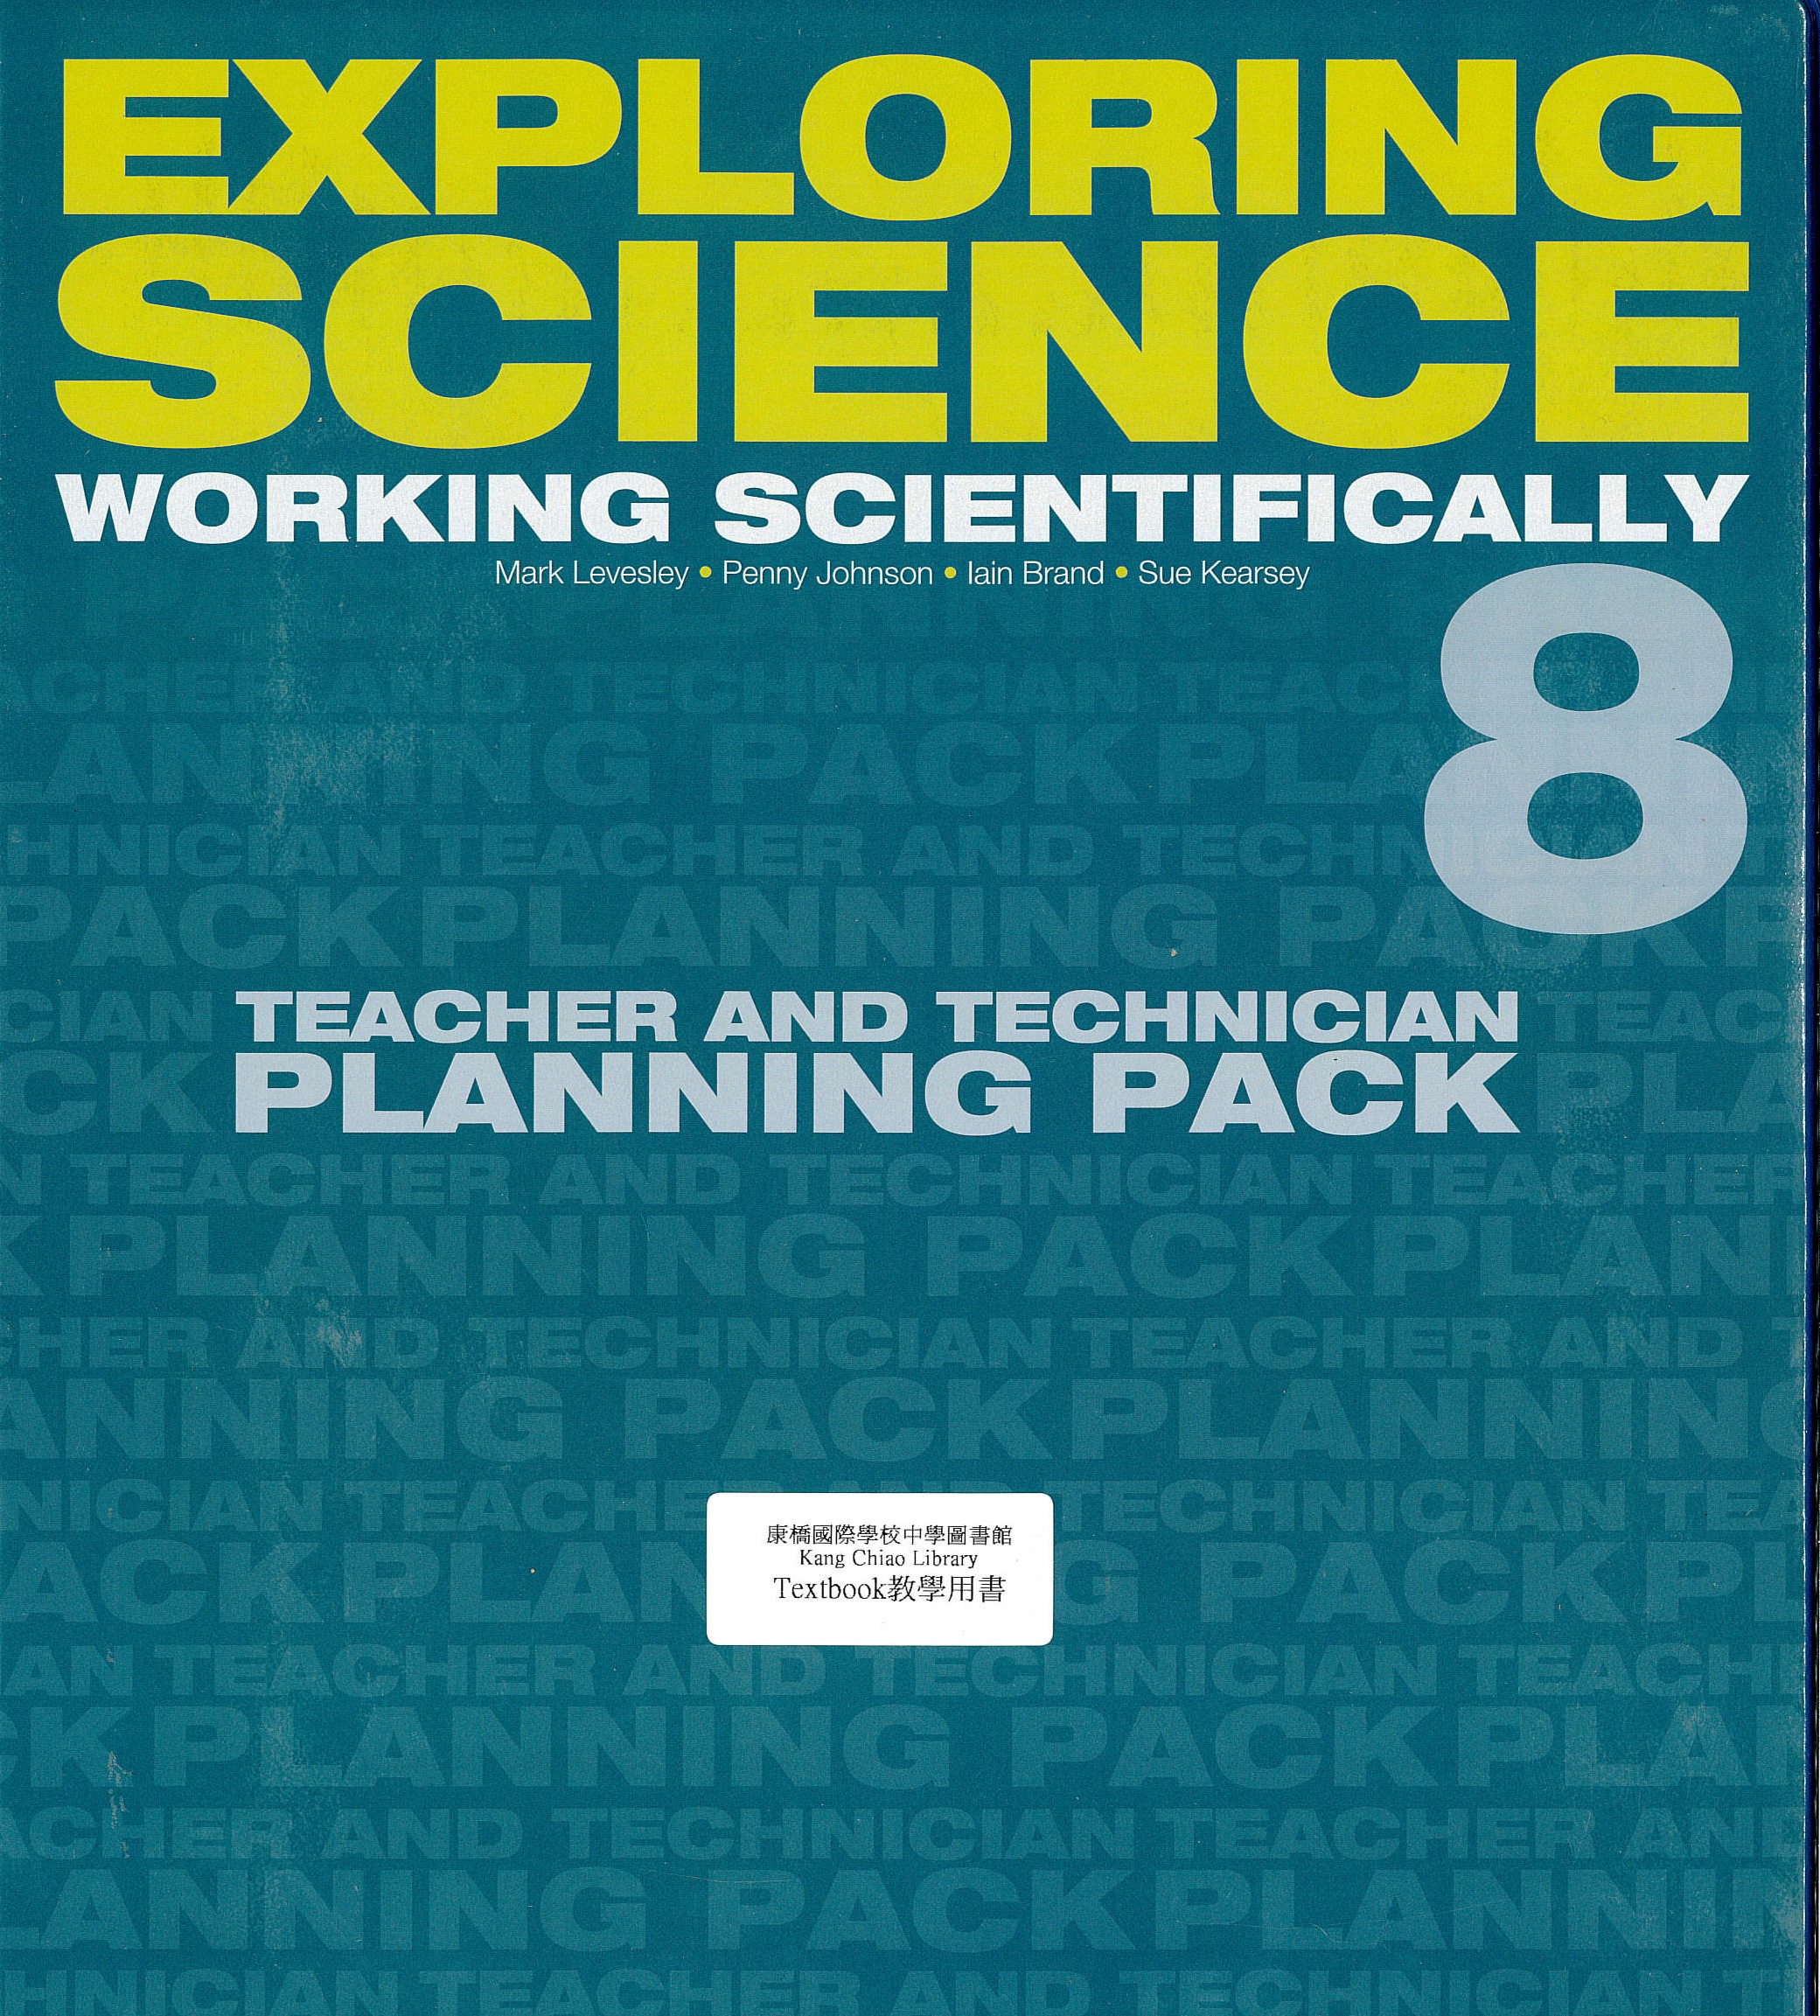 Exploring science : working scientifically(8) : teacher and technician planning pack